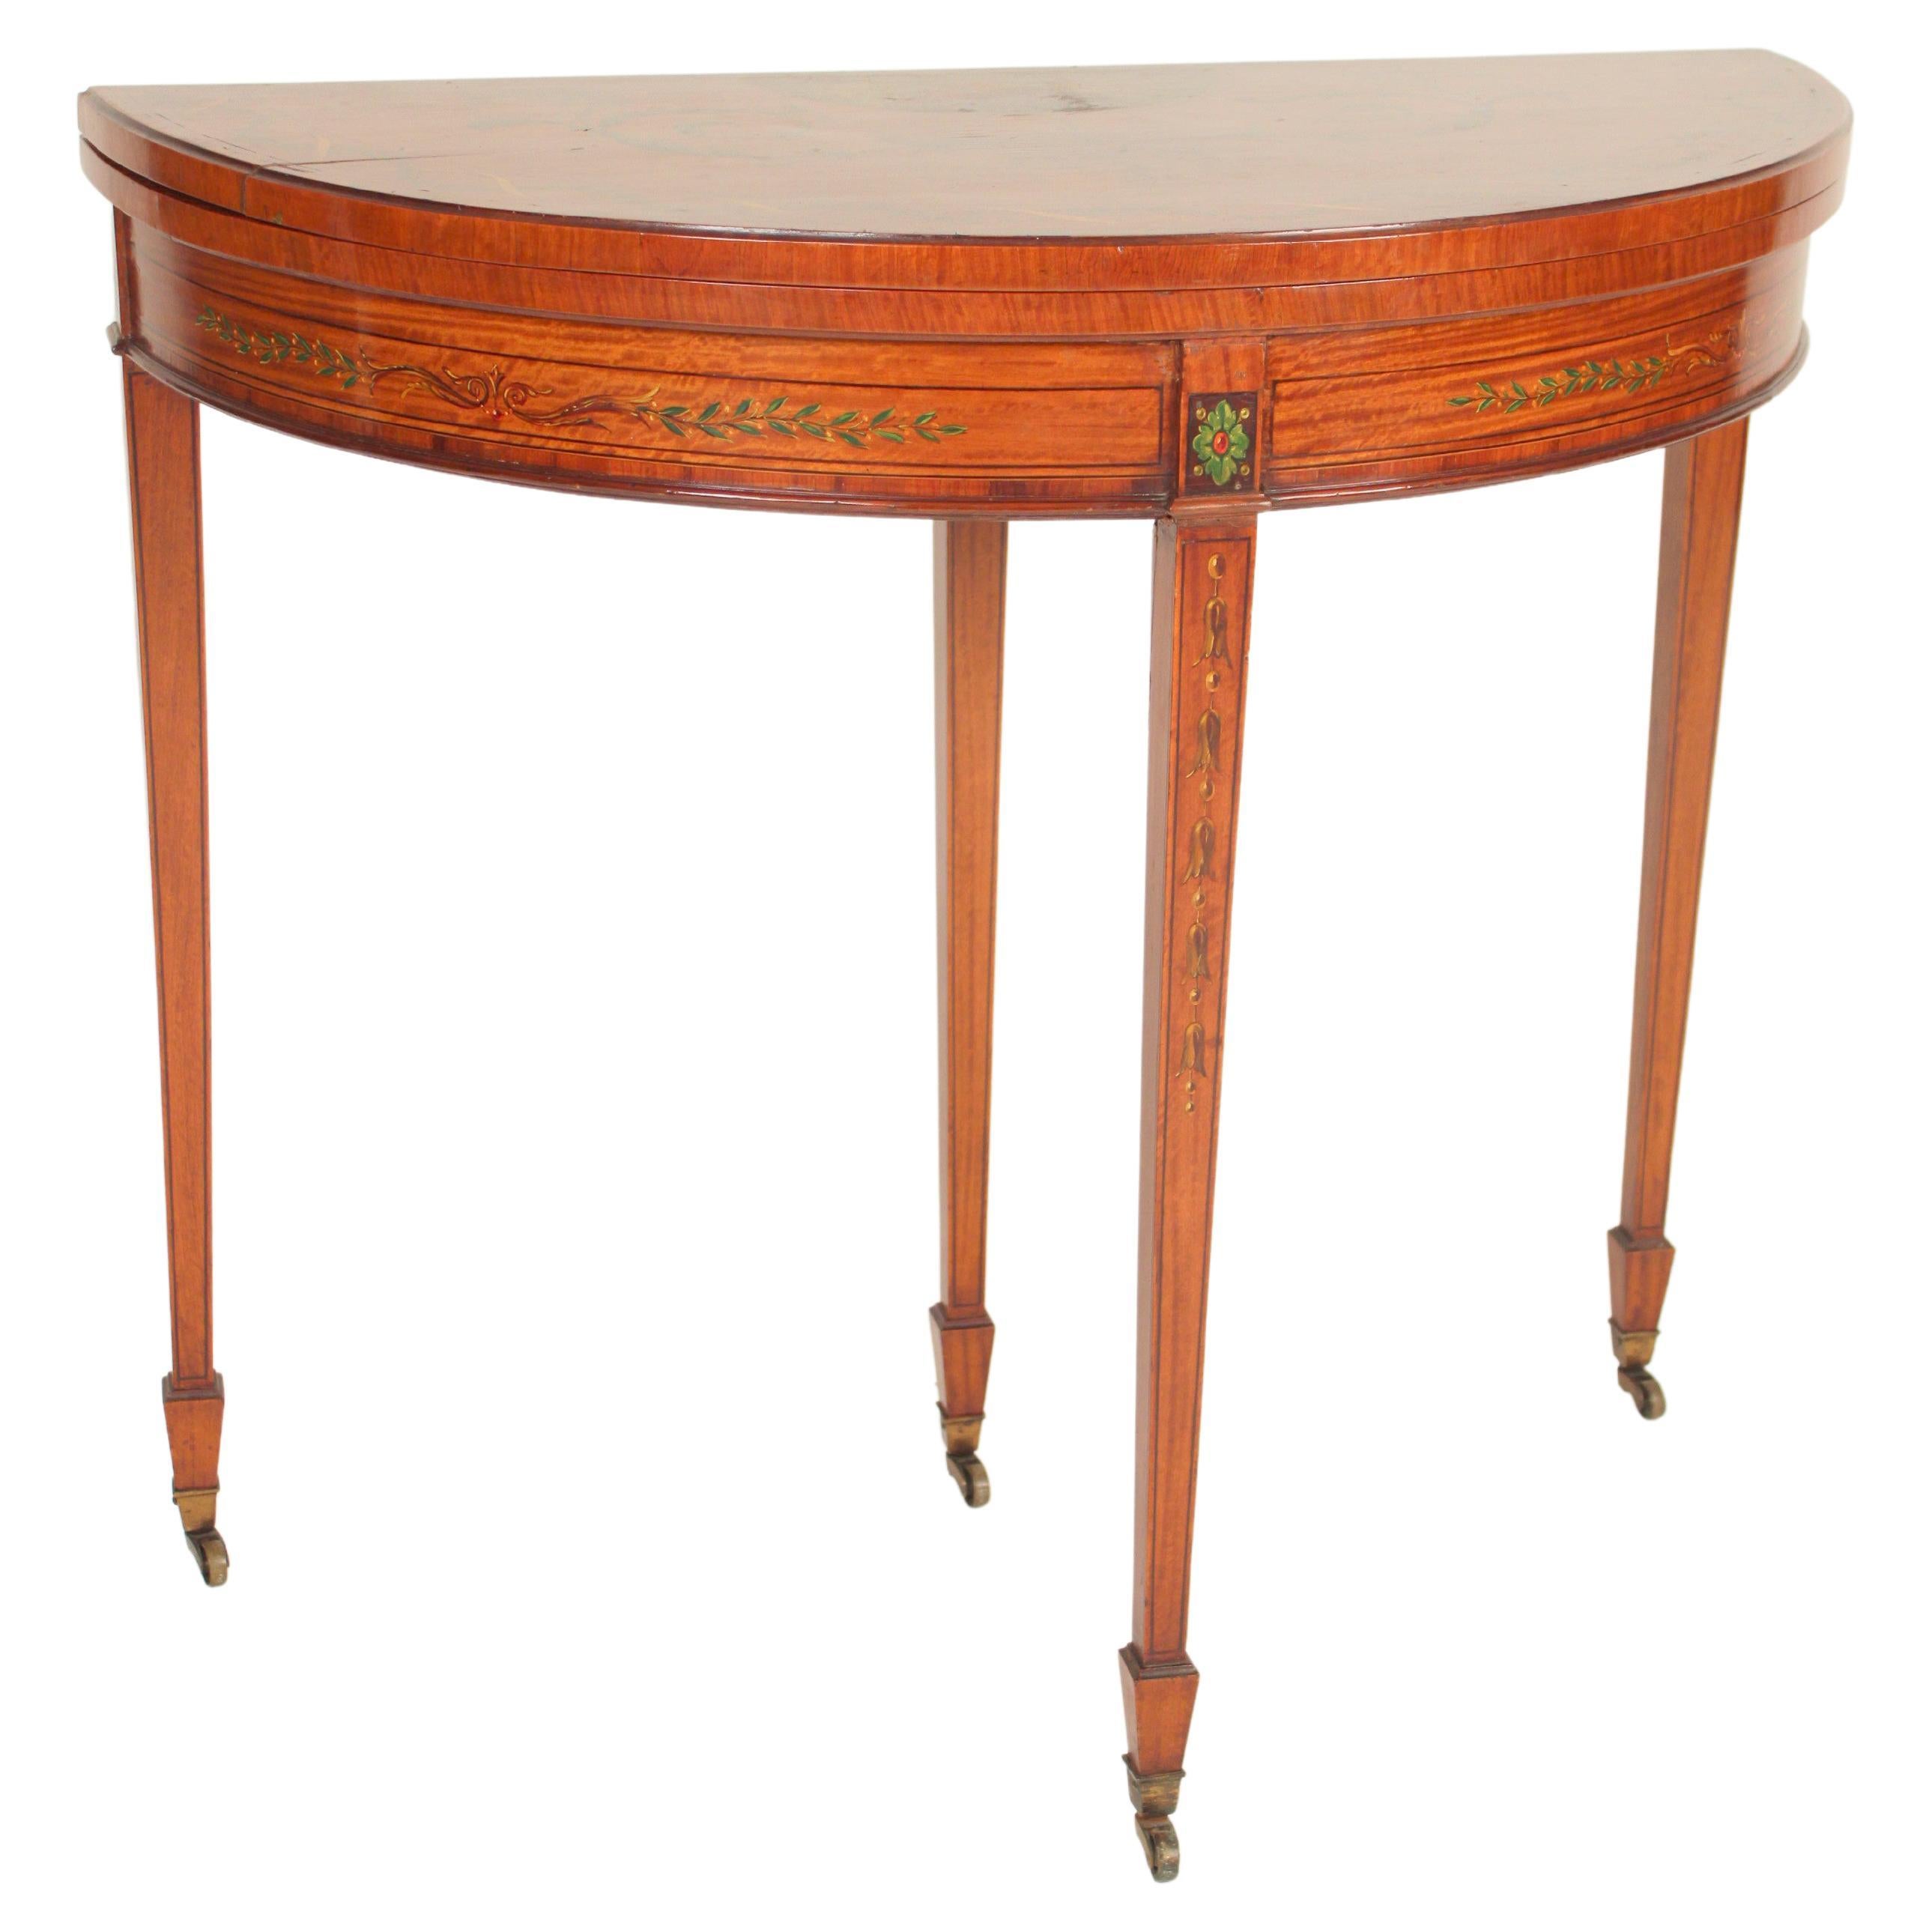 English Edwardian Painted Satin Wood Games Table For Sale